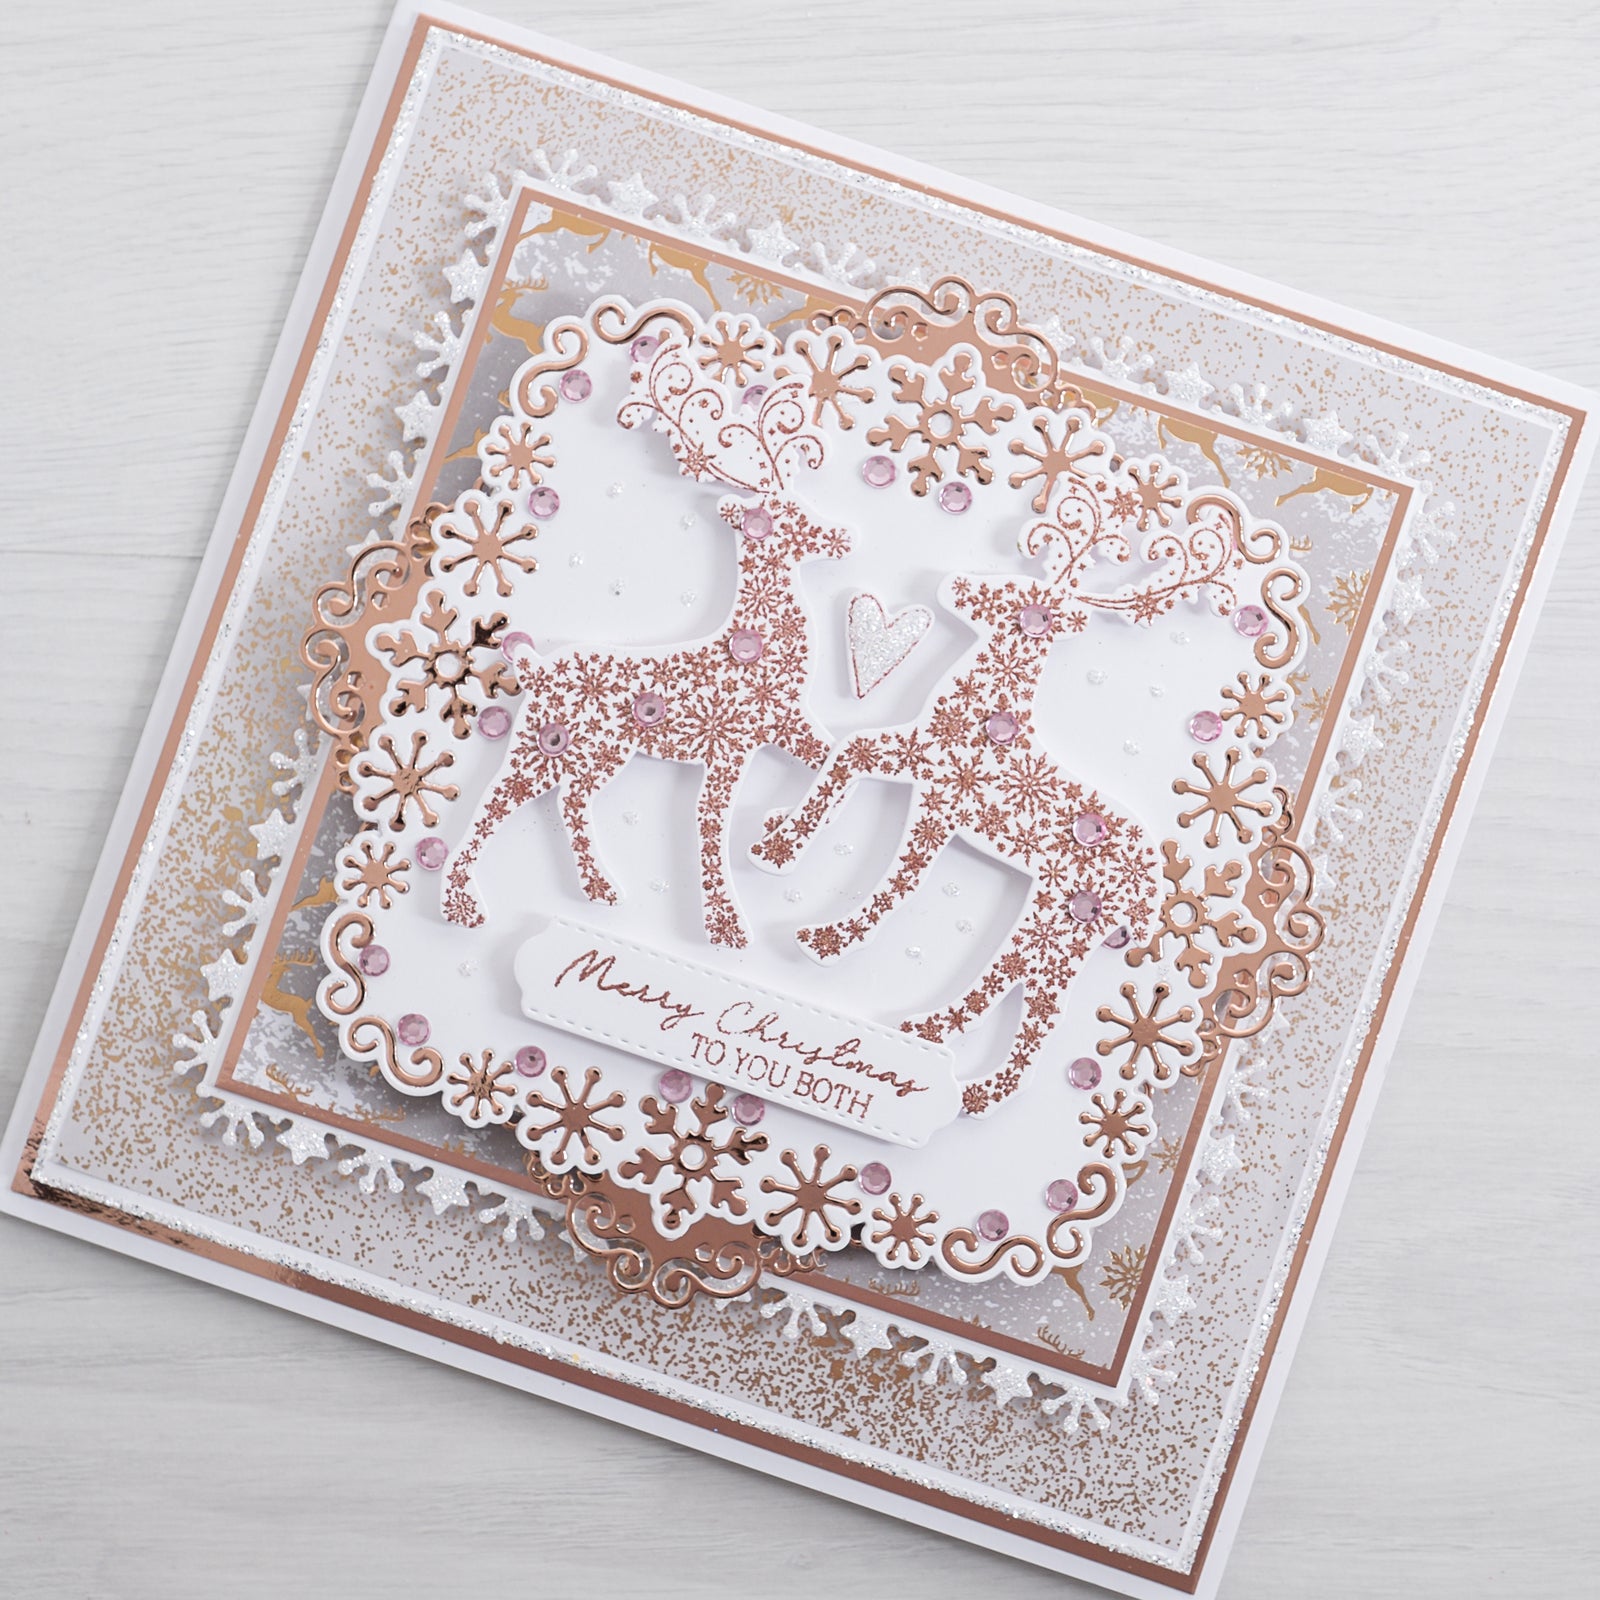 Create this glittering festive Rose Gold Reindeer Christmas Card with this quick and easy step-by-step tutorial from Chloes Creative Cards.